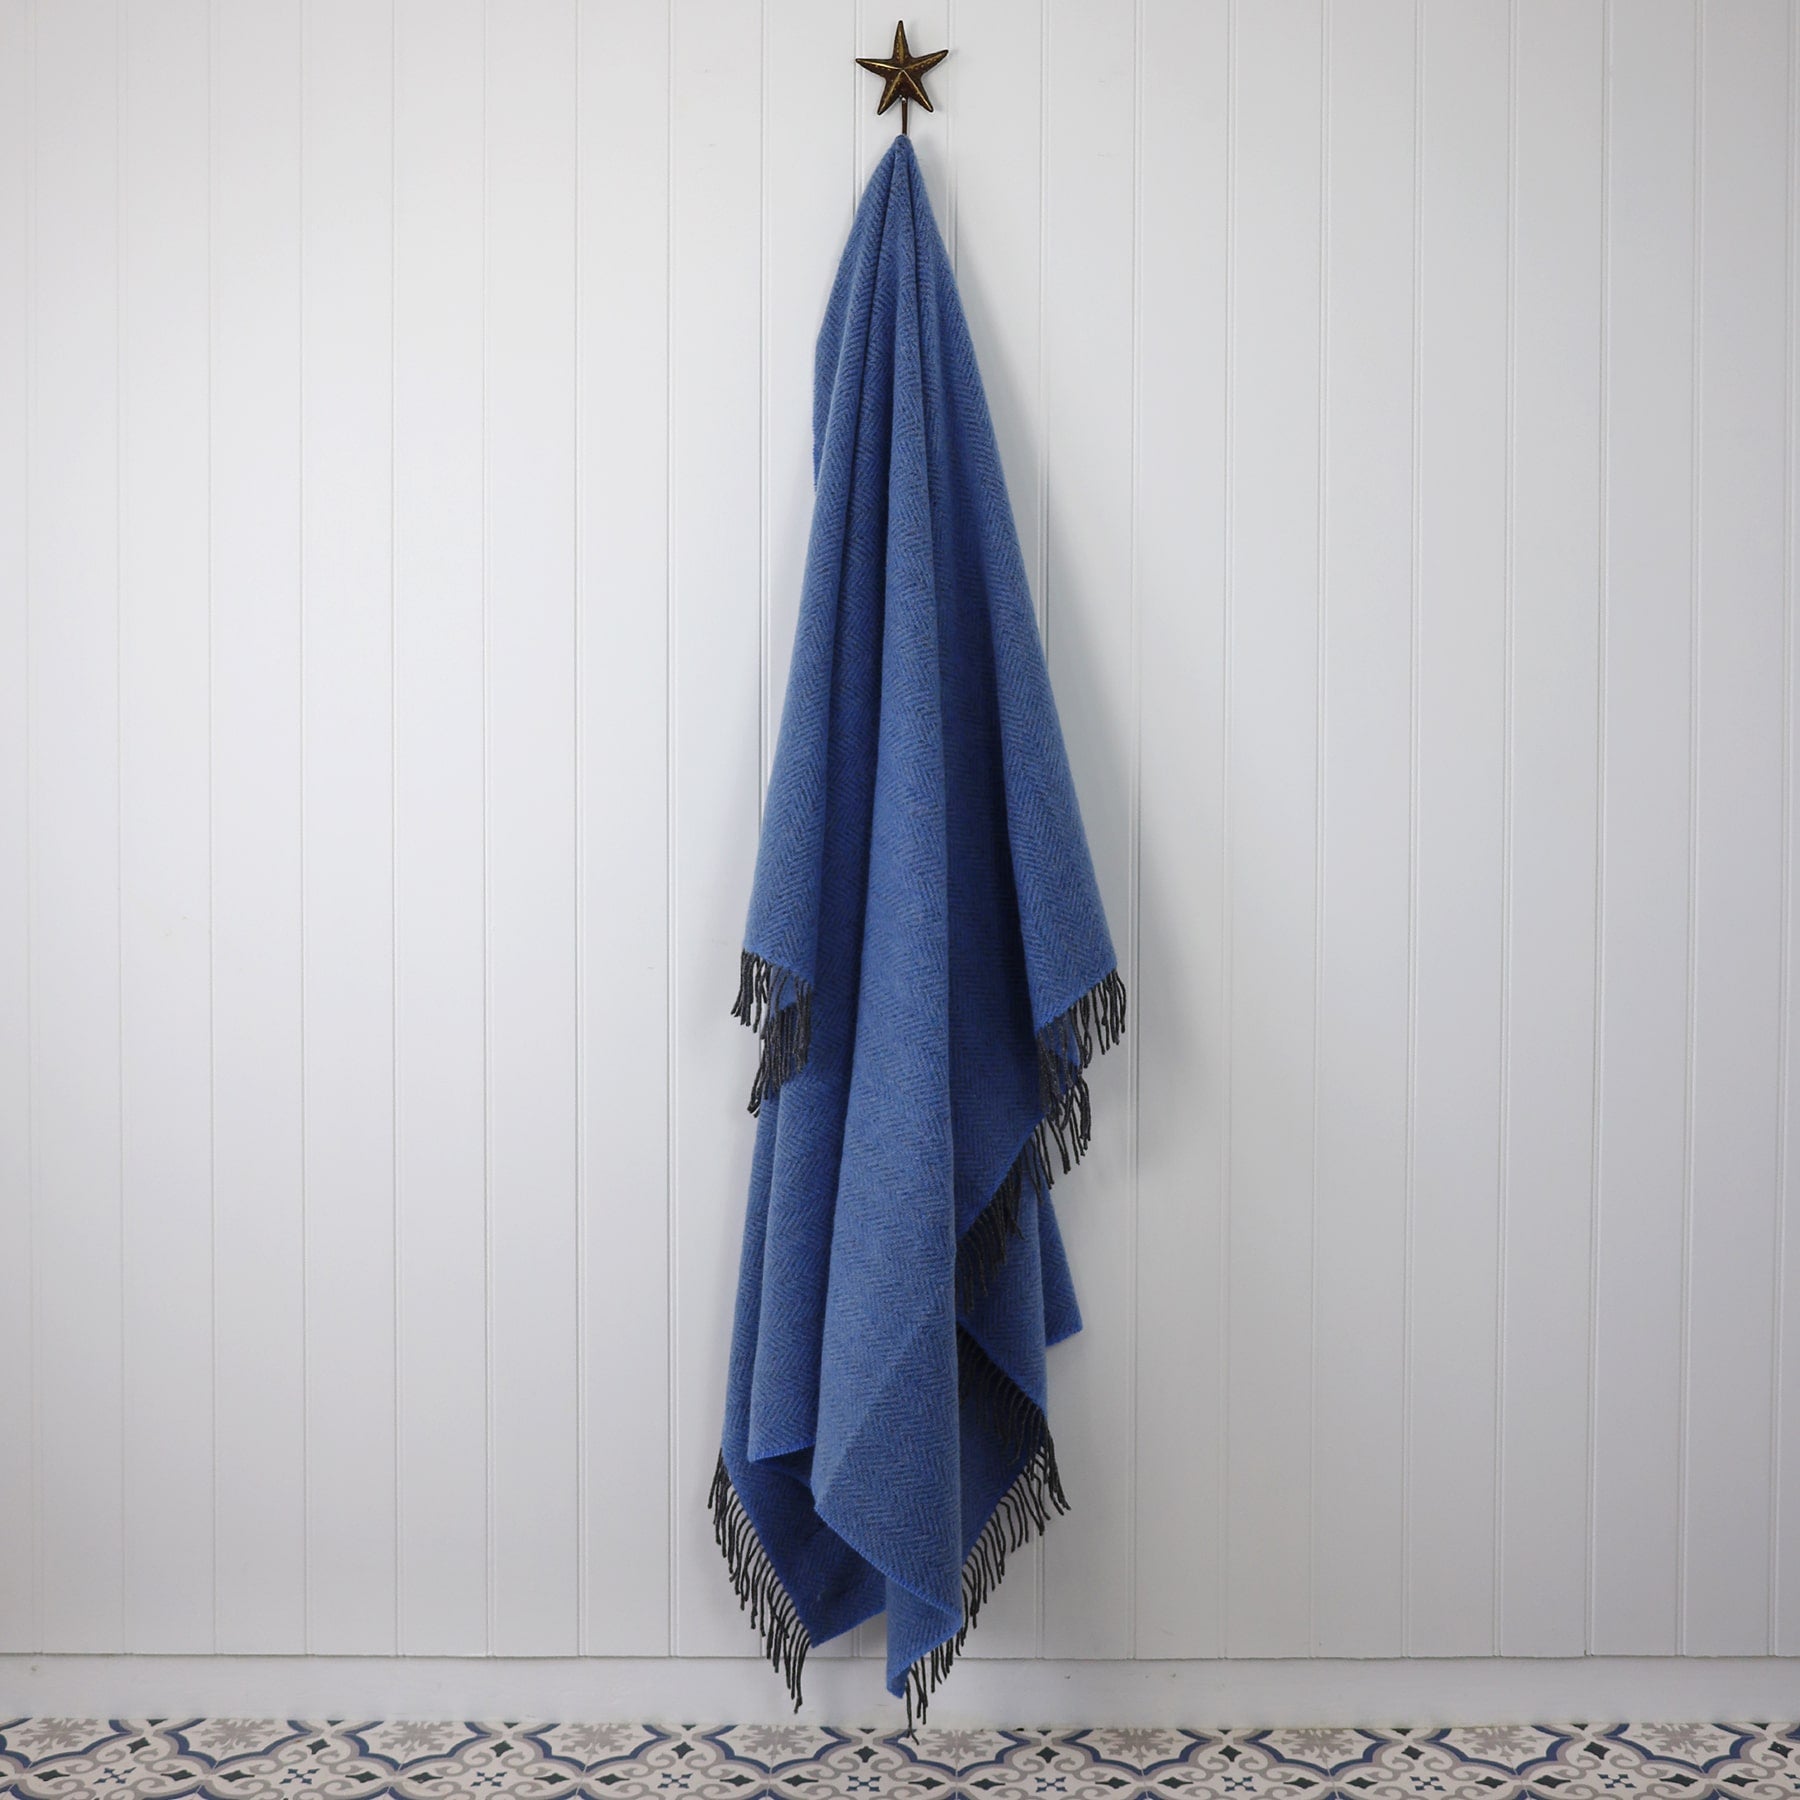 Cashmere Throw Grey Blue Herringbone draped on a Starfish hook against a white tongue and grooved wall